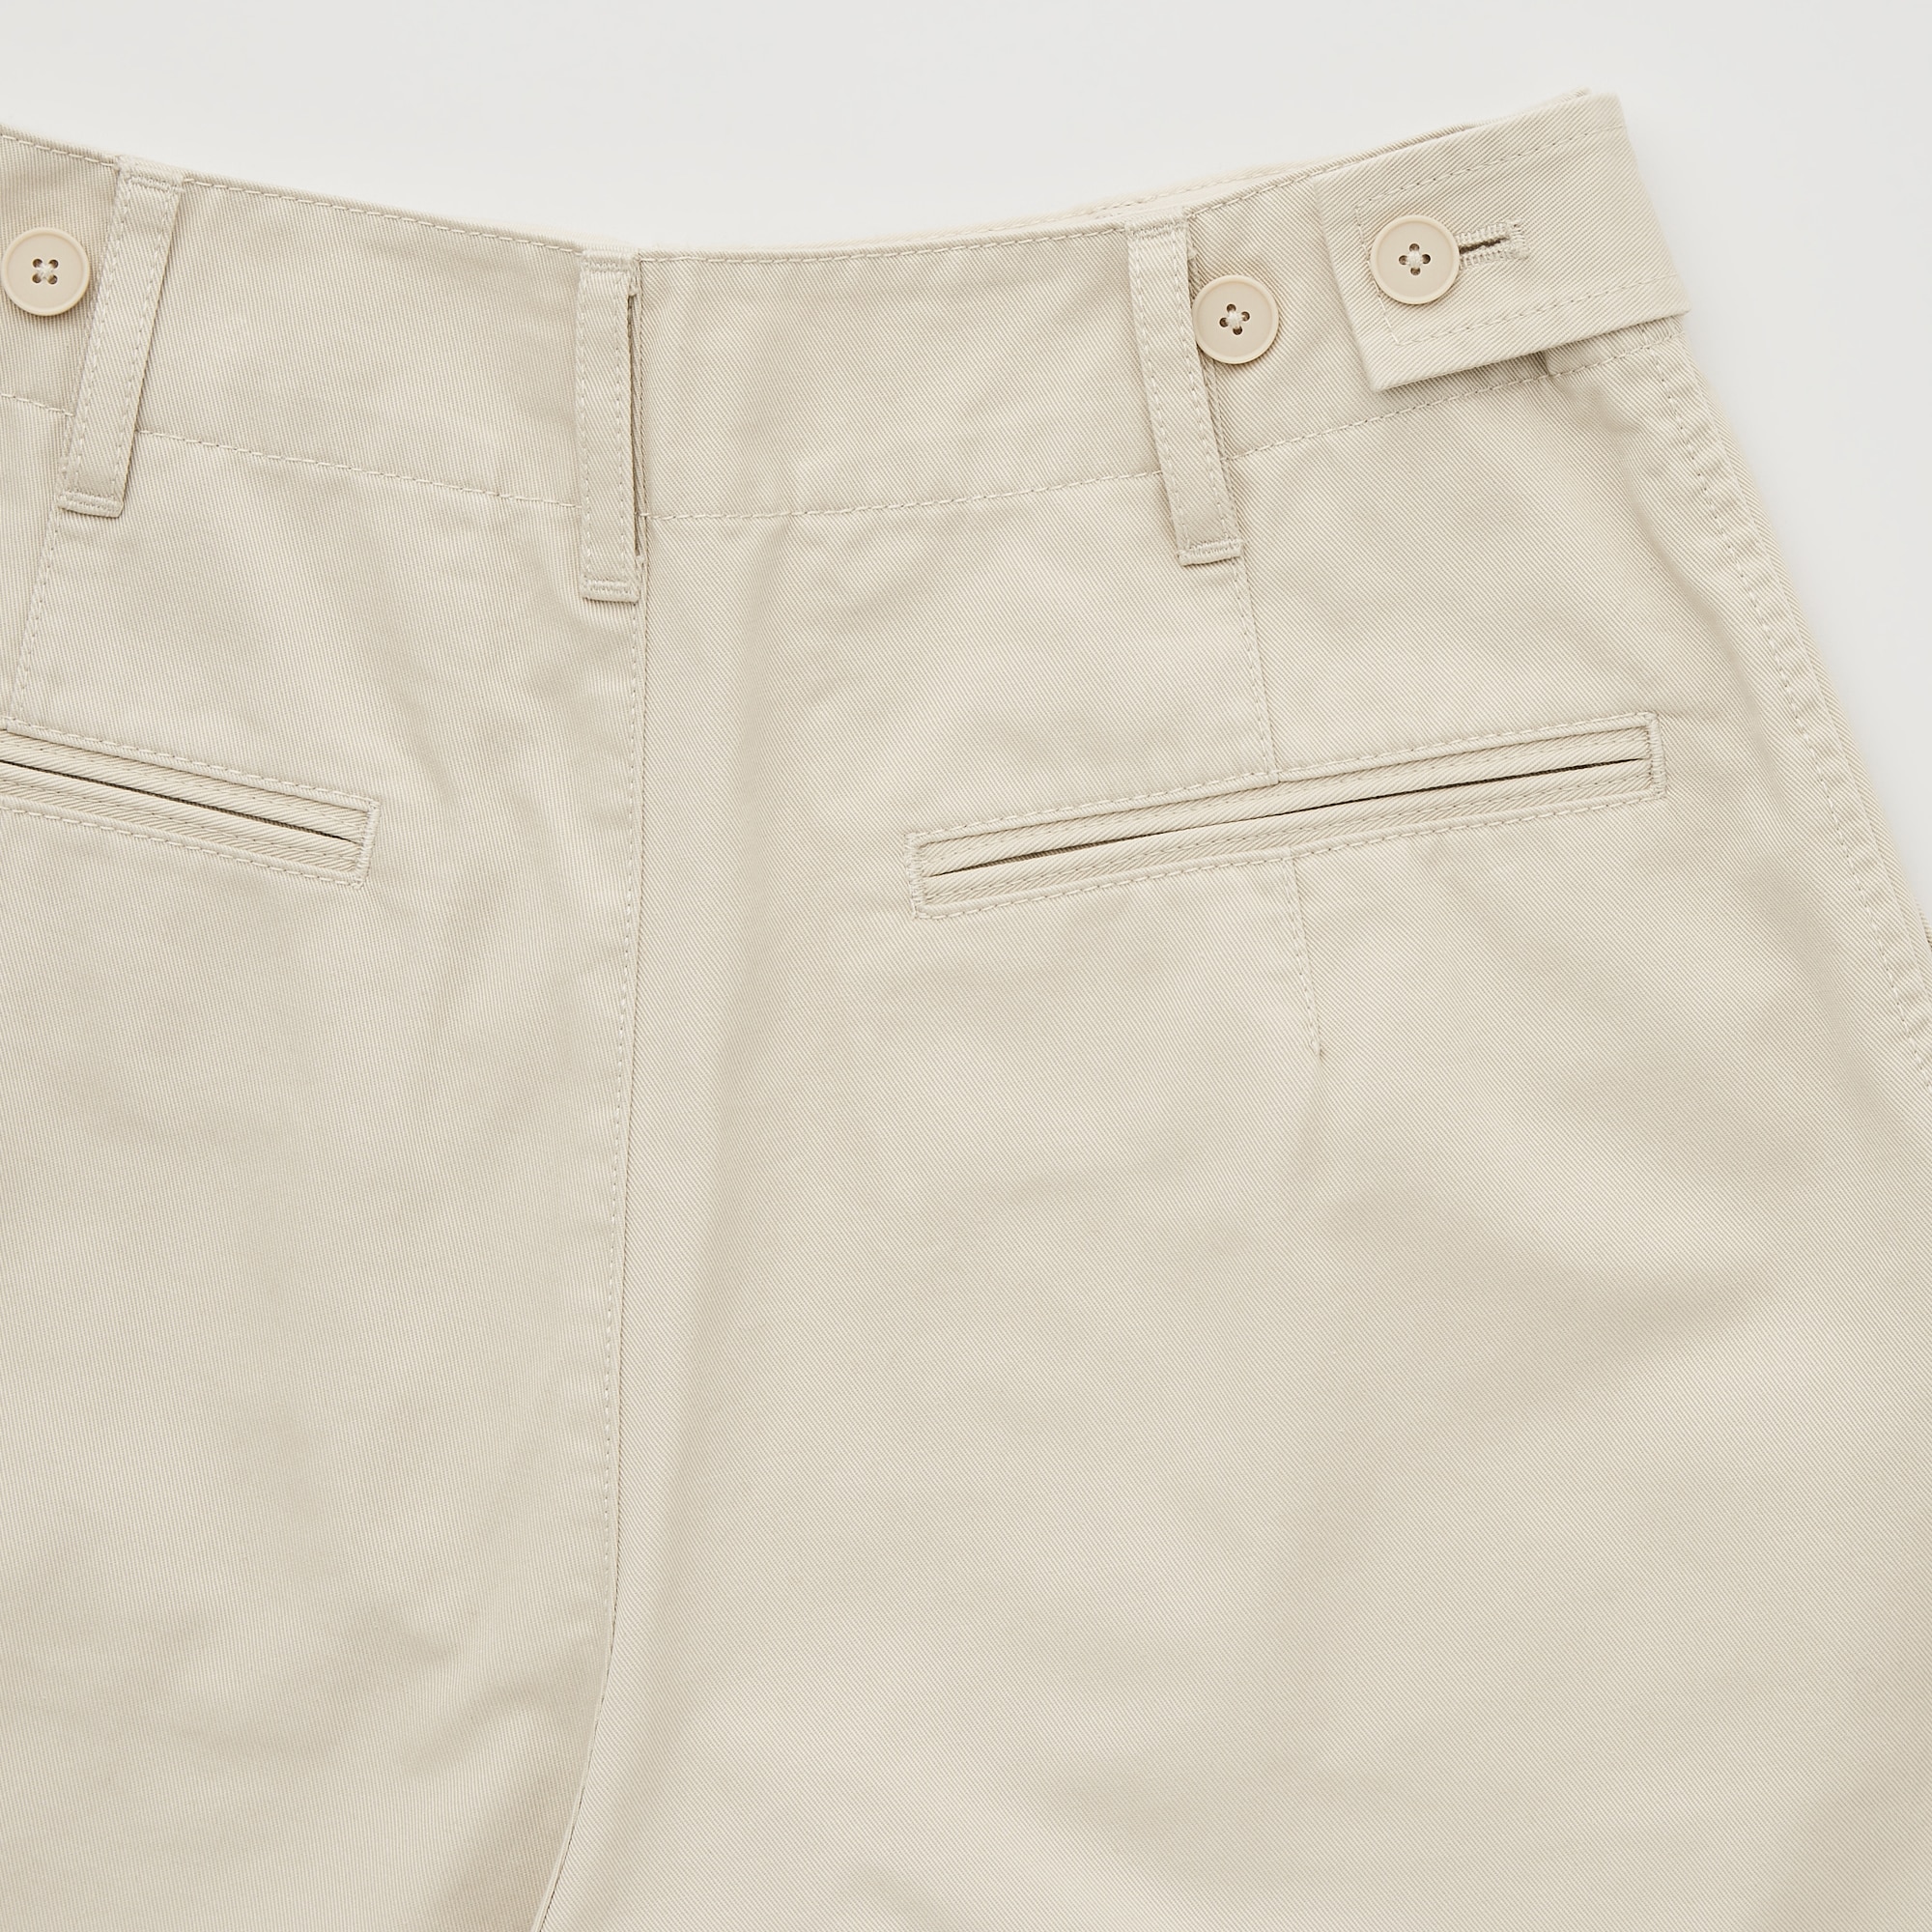 Women's Woven Twill Roll Up Pant made with Organic Cotton | Pact